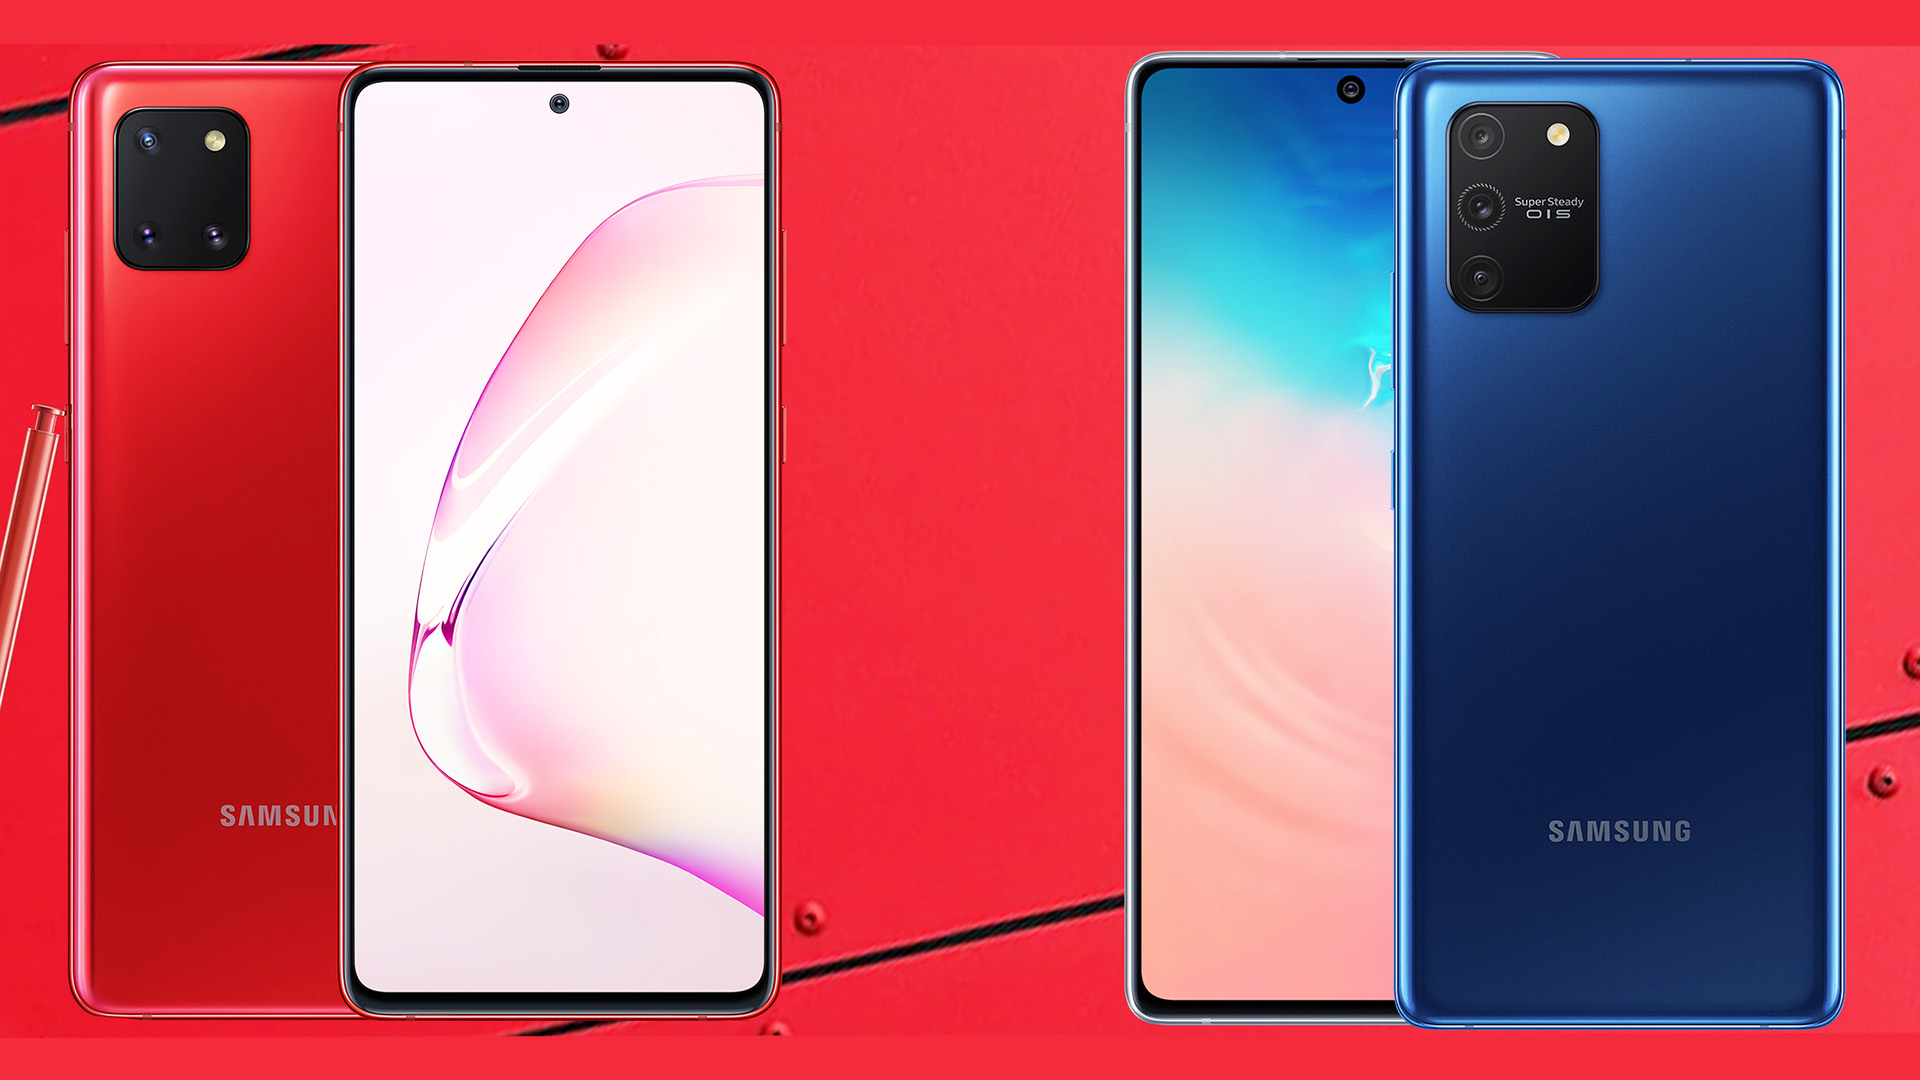 Samsung Galaxy S10 Lite announce with a 6.7-inch display